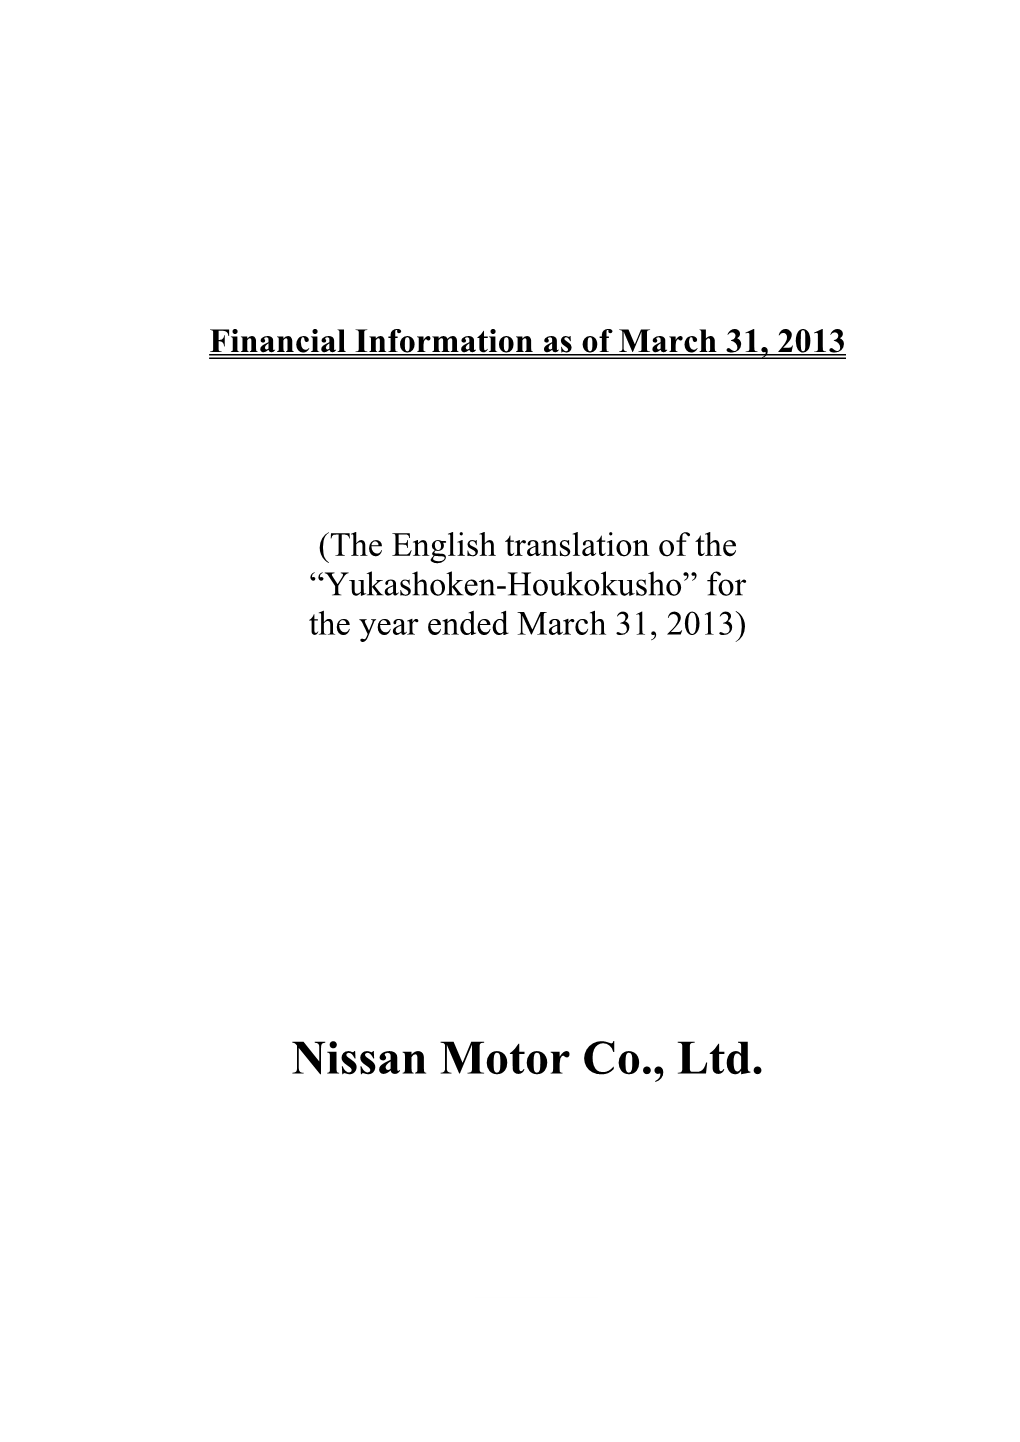 Financial Information As of March 31, 2013